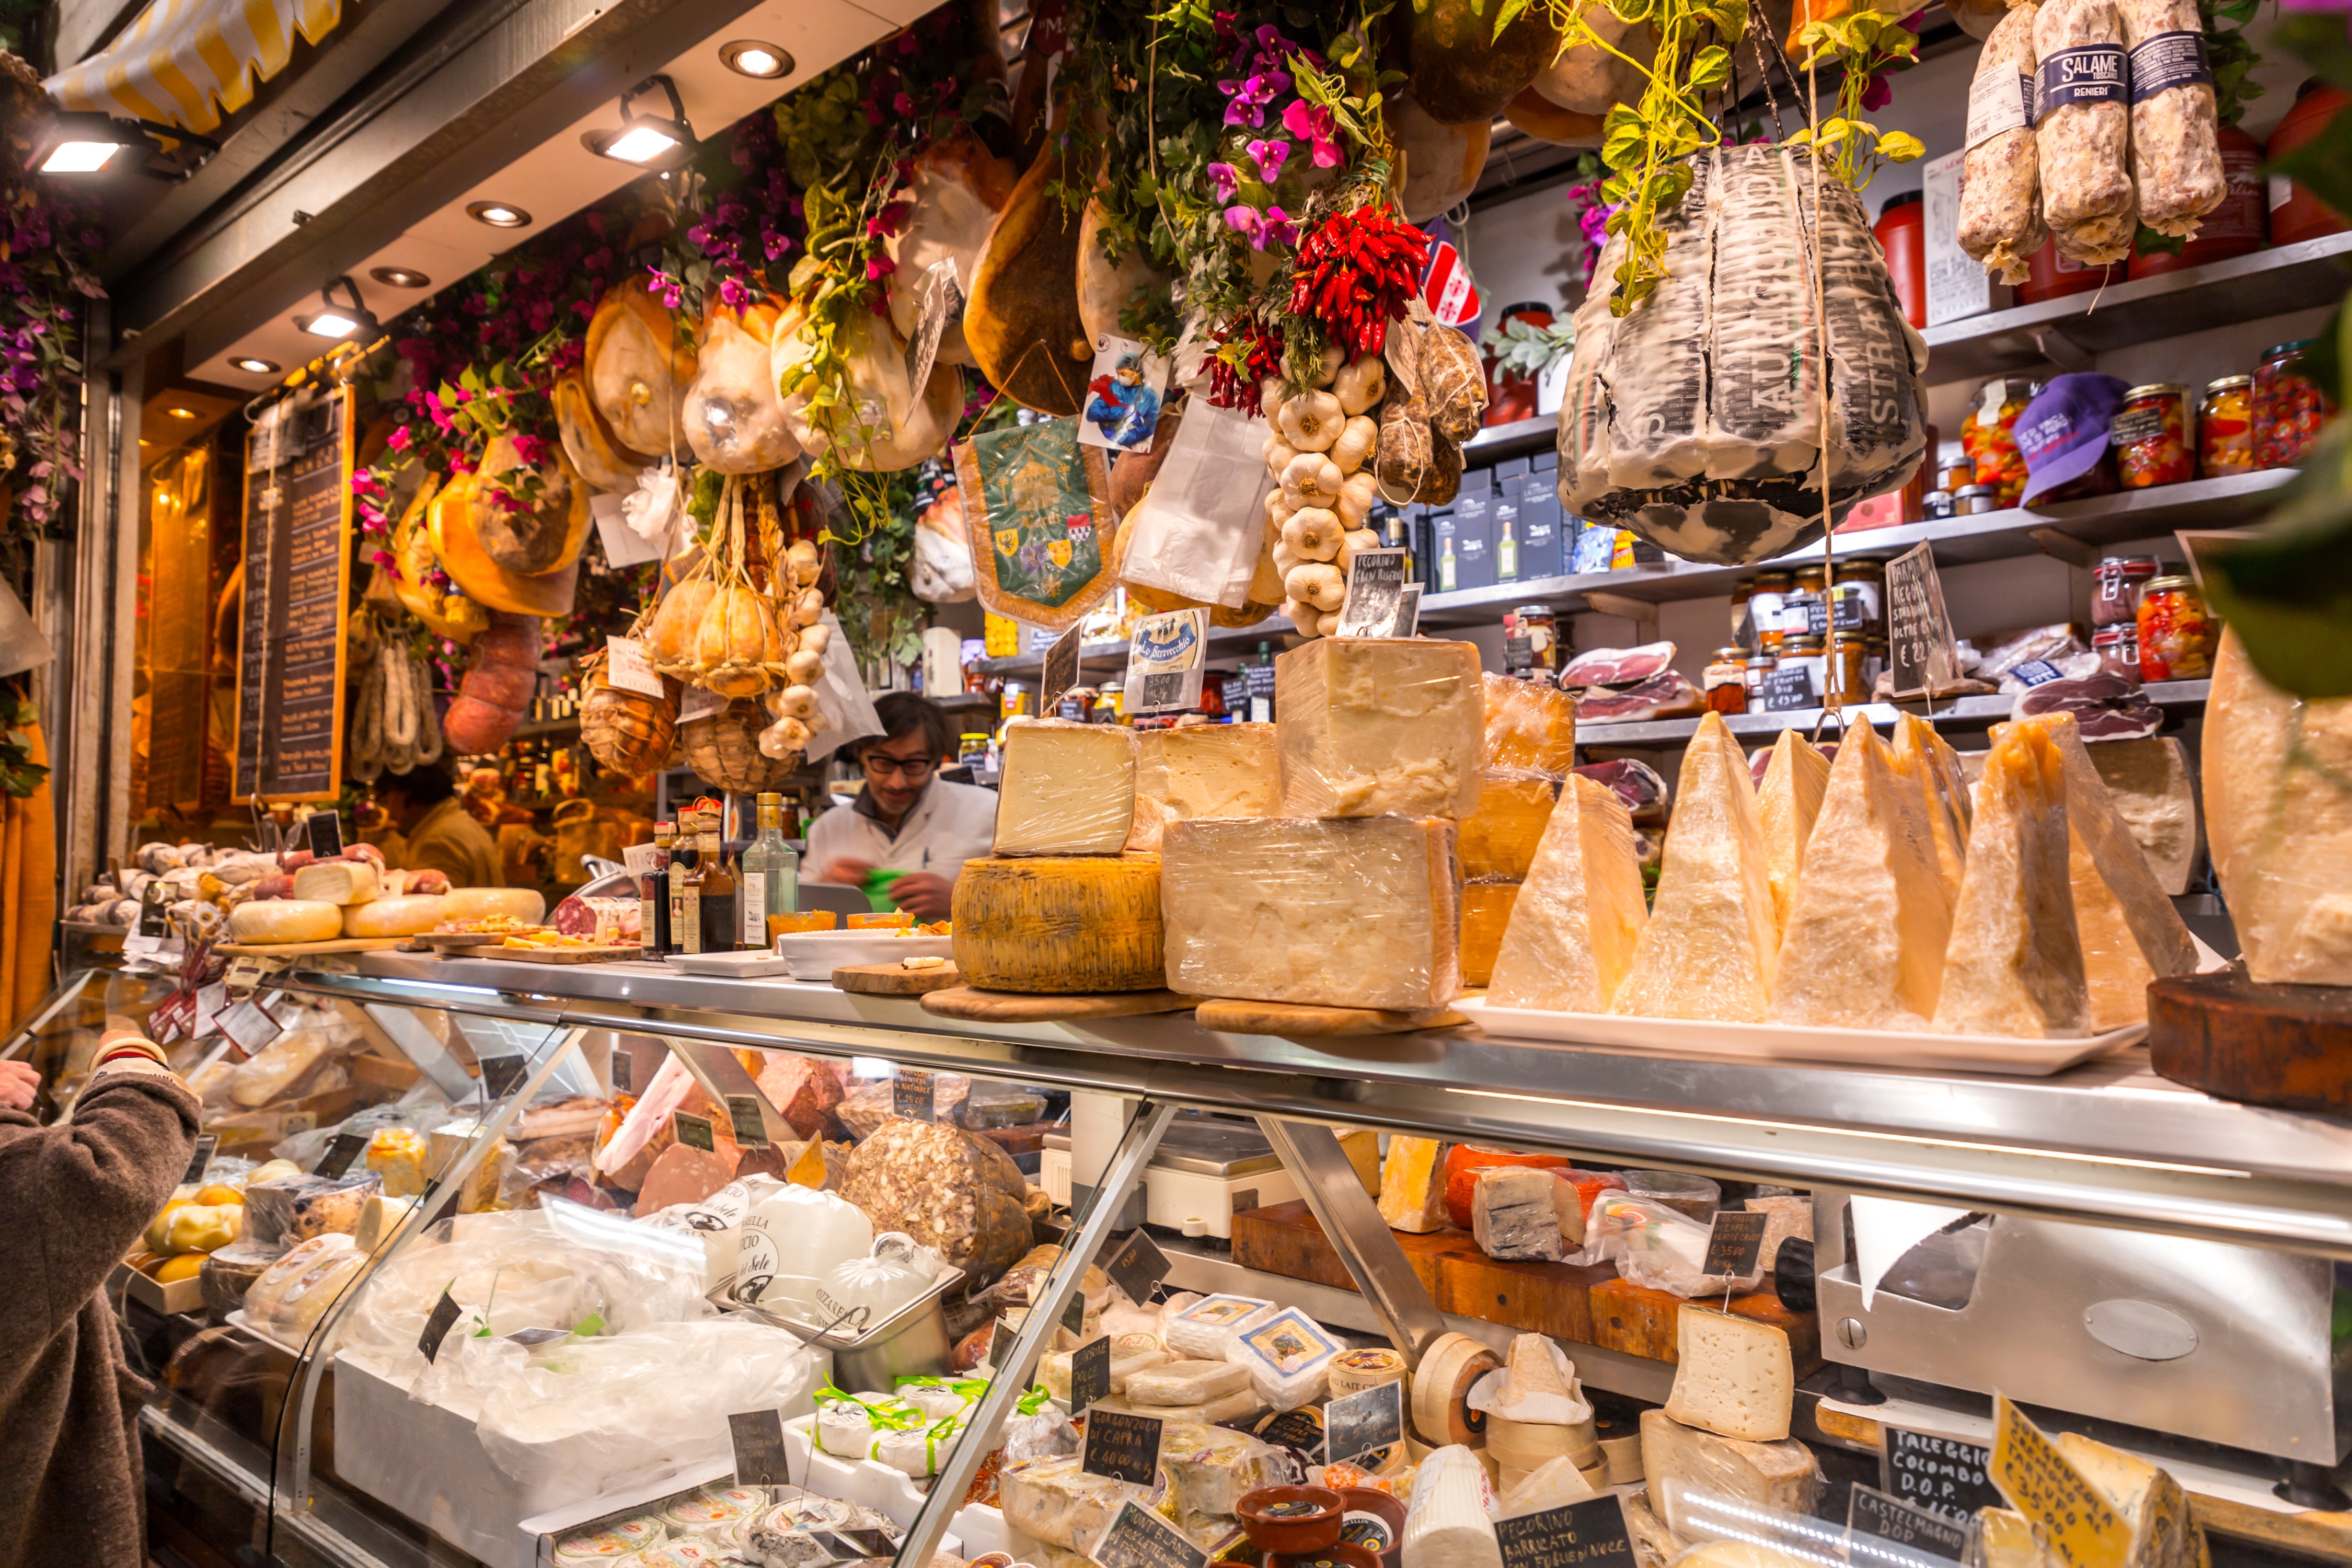 he Mercato Centrale is a food market located between via dell'Ariento, via Sant'Antonino and via Panicale, Florence.